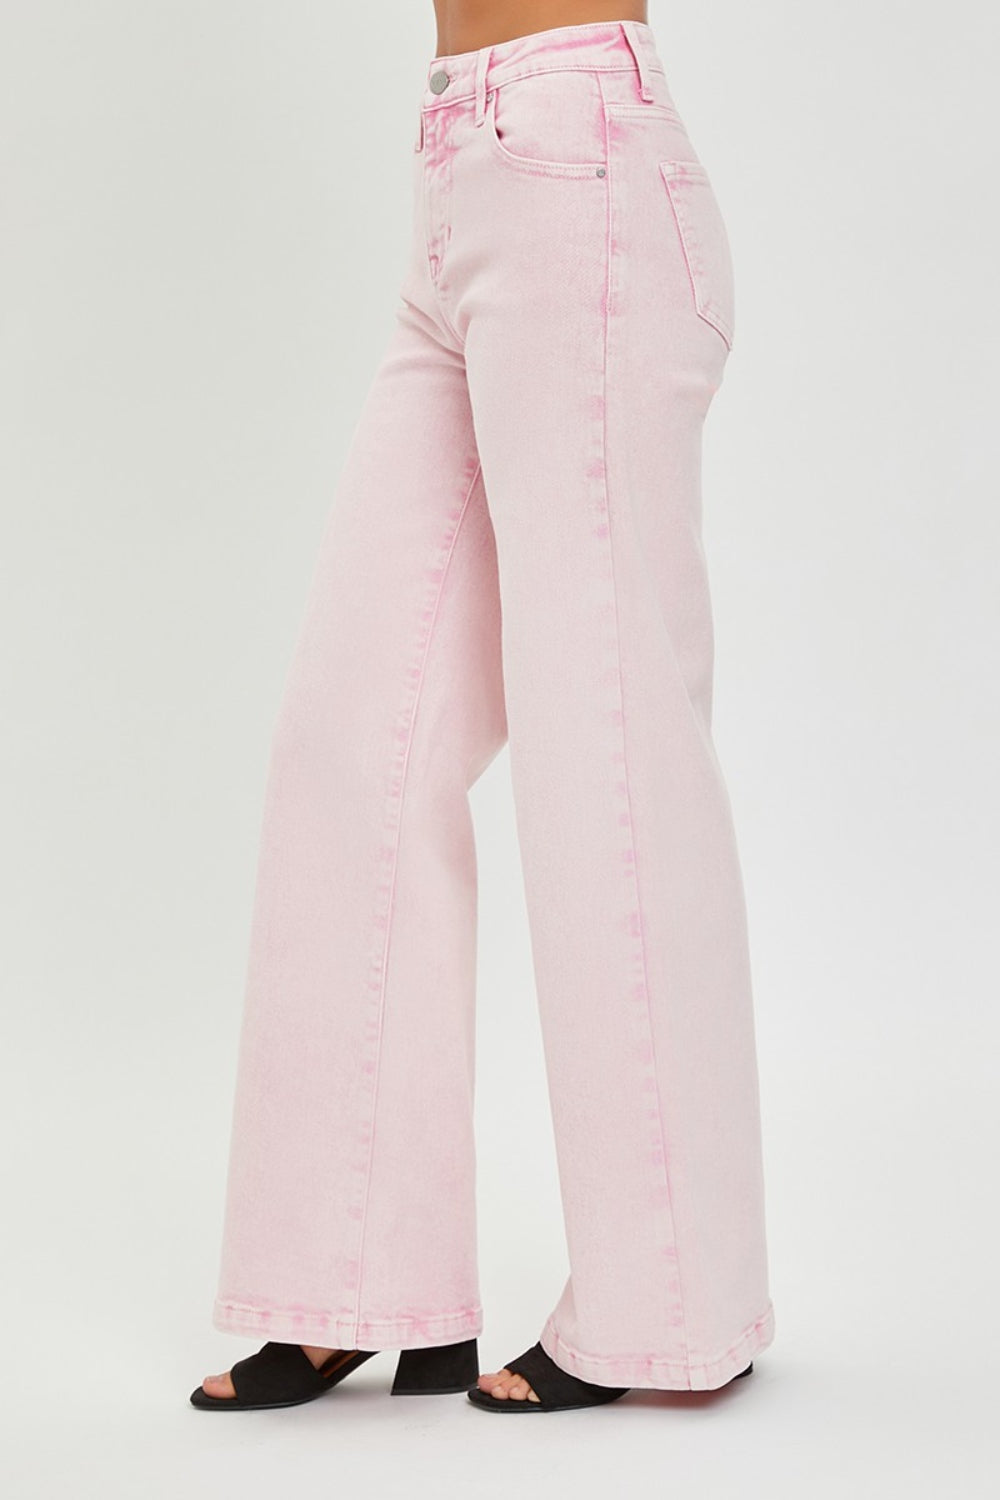 These high rise tummy control wide leg jeans are a flattering and stylish choice for any wardrobe. The high rise design helps slim and shape your midsection. The wide leg silhouette adds a touch of retro flair to your look.  0-3X